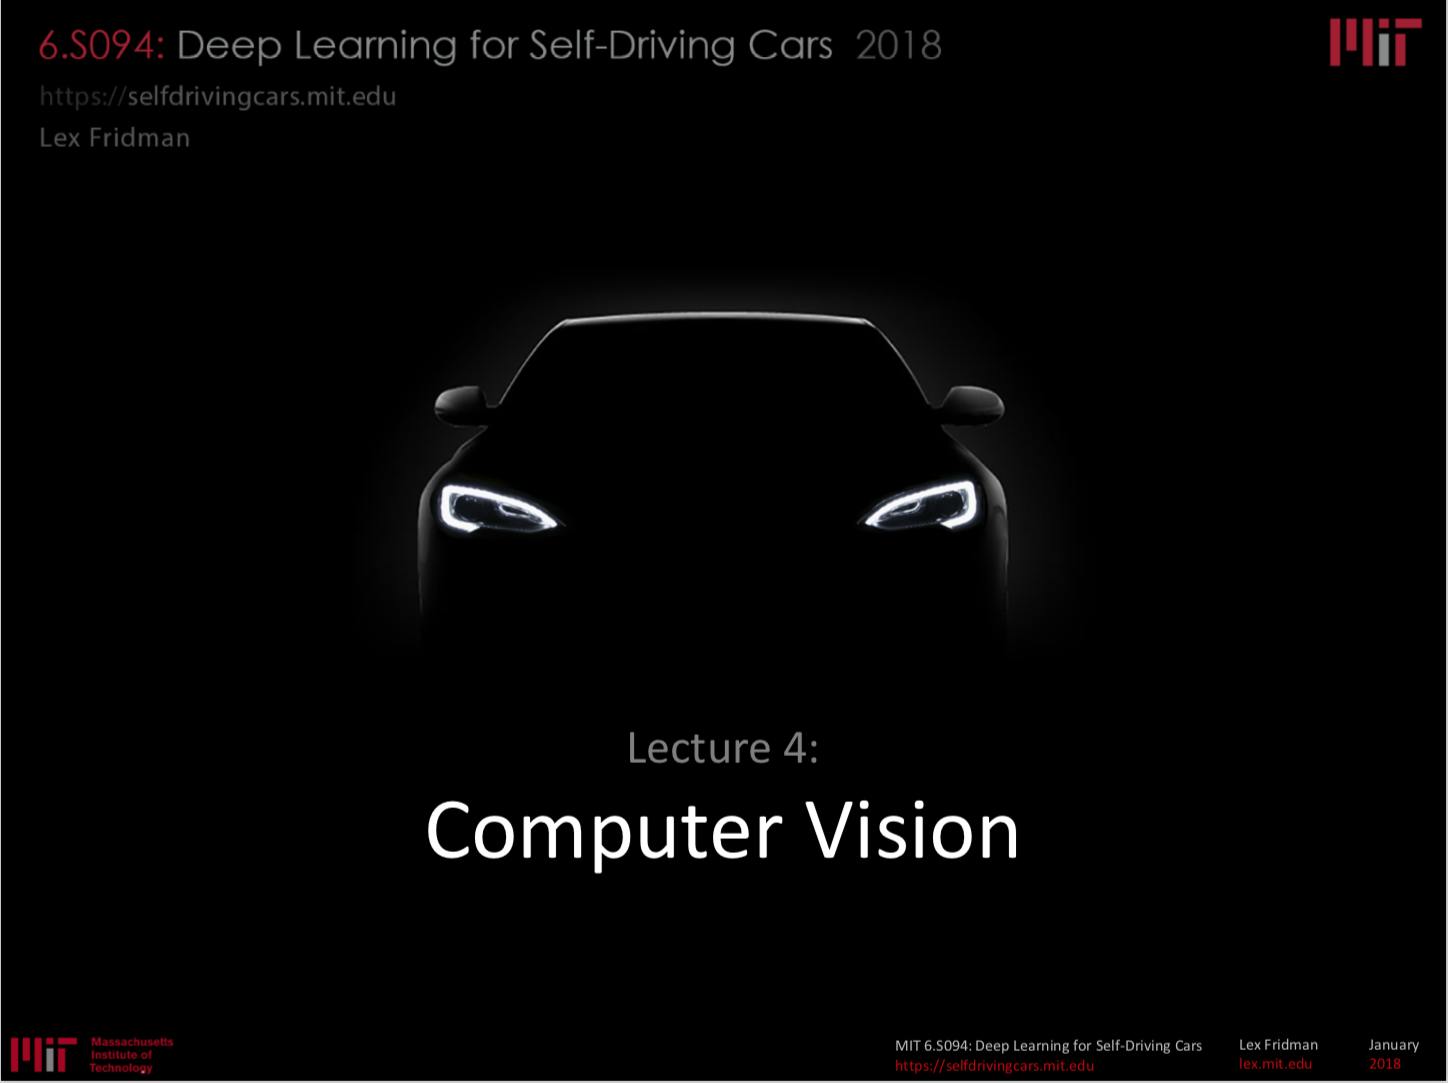 featured image - MIT 6.S094: Deep Learning for Self-Driving Cars 2018 Lecture 4 Notes: Computer Vision